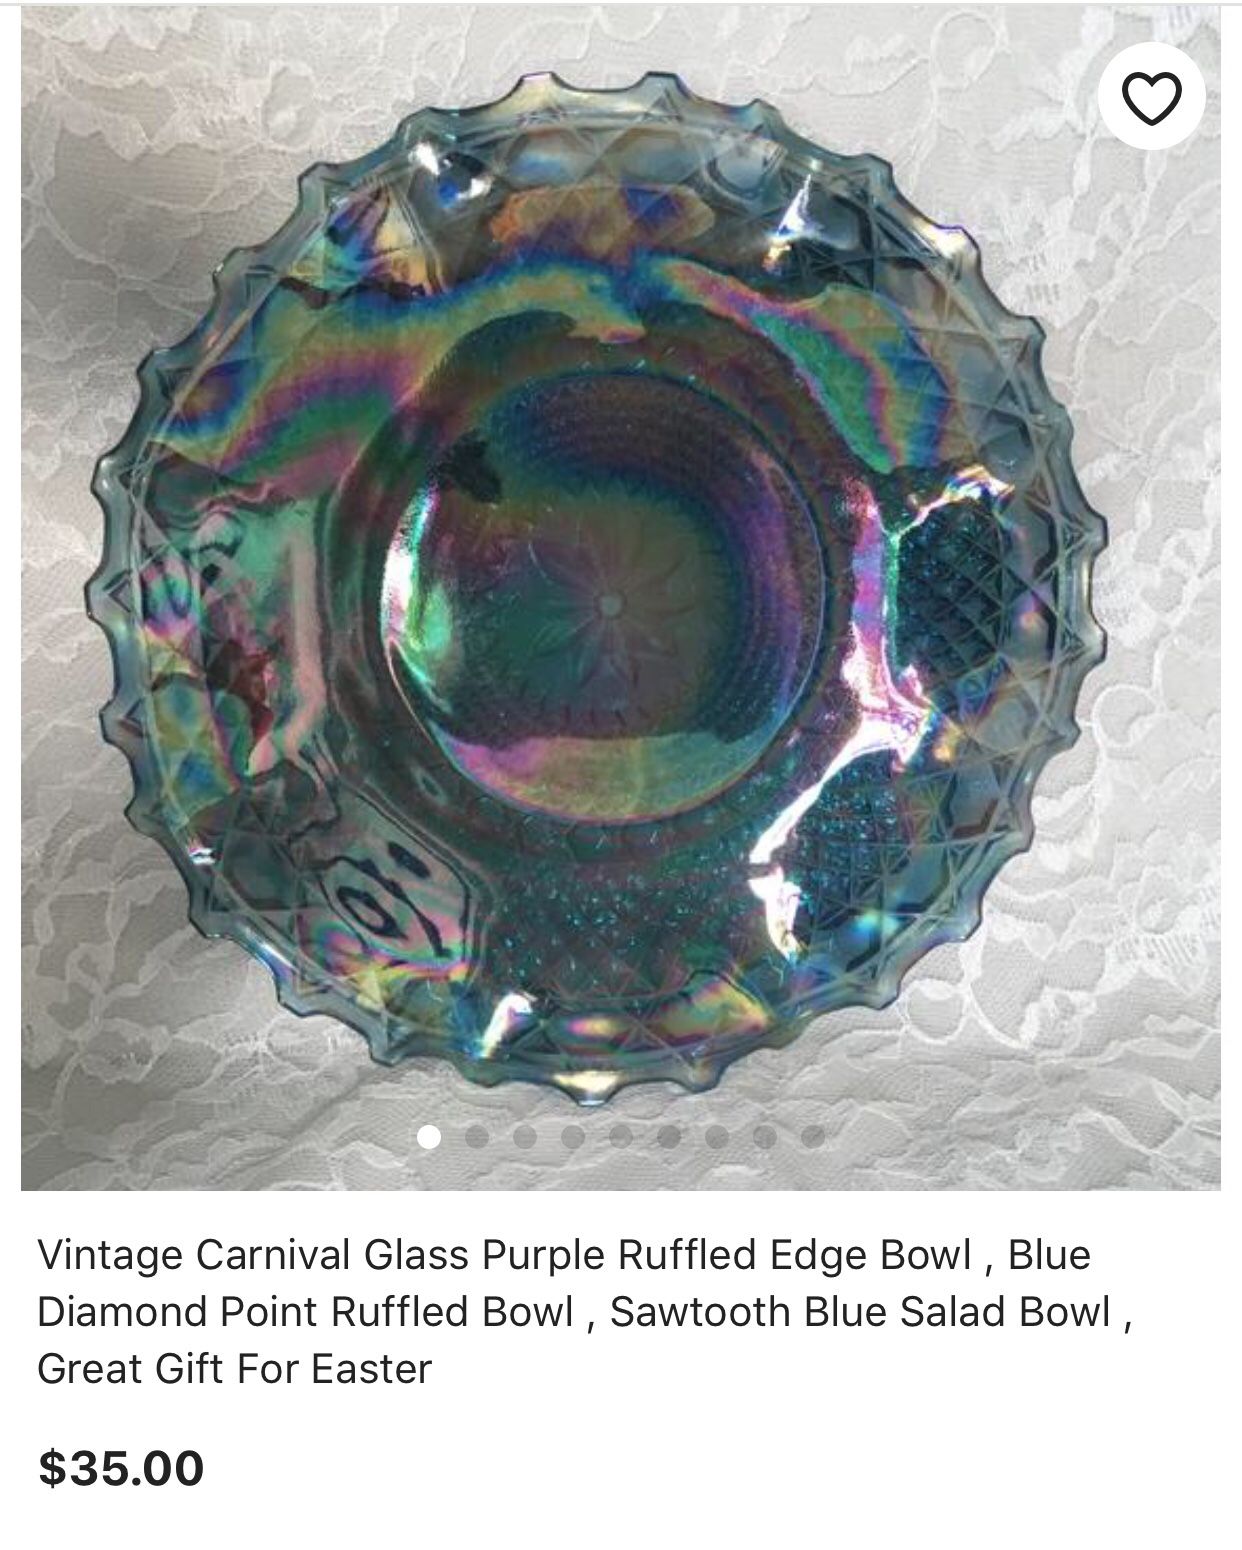 Vintage carnival glass. I have 1 available. $25